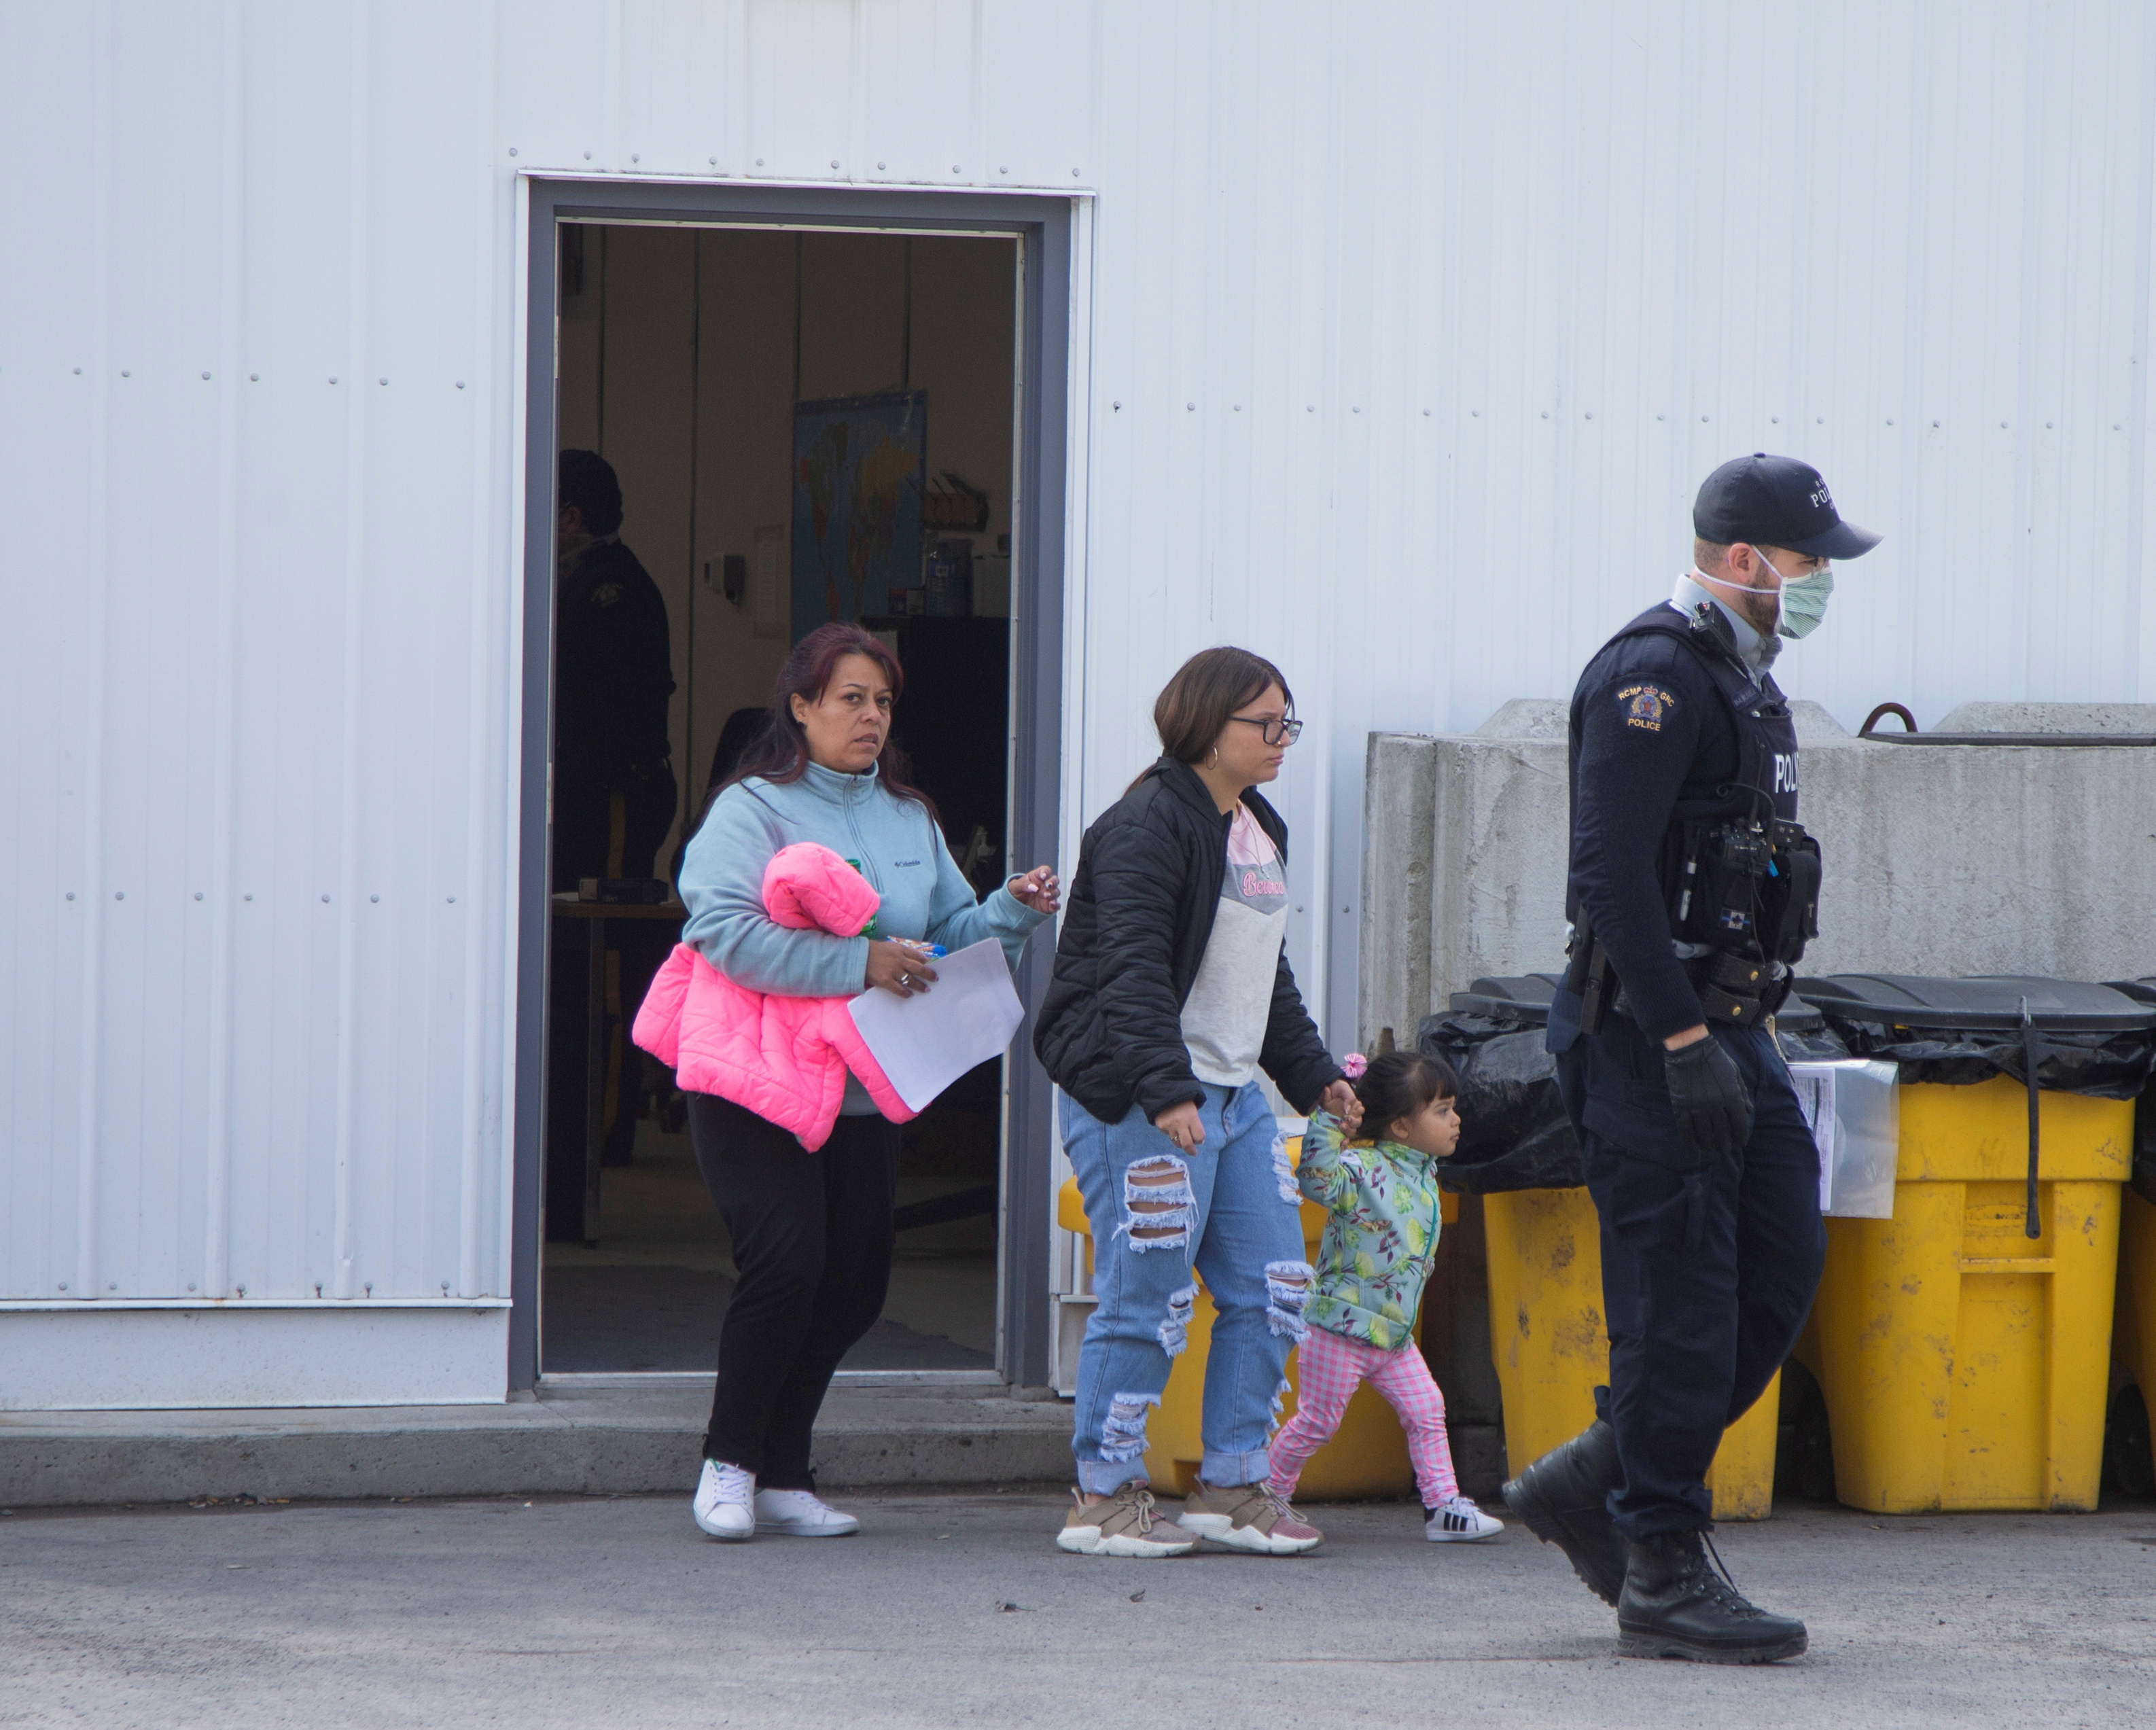 Asylum seekers follow a Royal Canadian Mounted Police (RCMP) officer after being processed for crossing the border from New York into Canada at, Roxham Road, in Hemmingford, Quebec